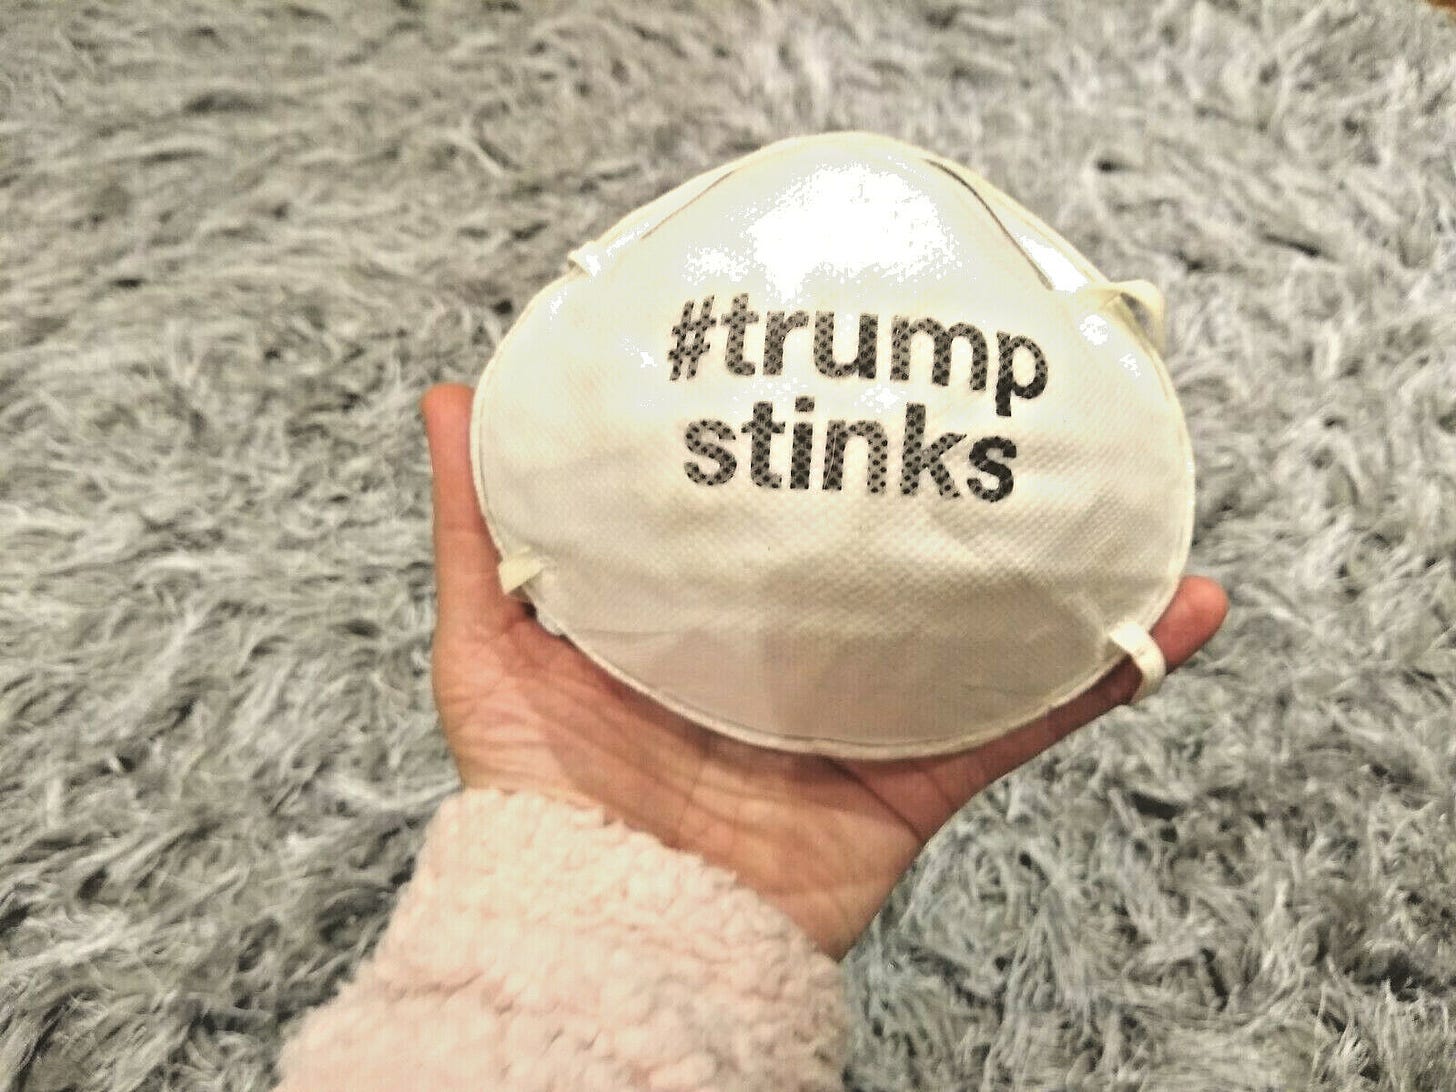 Trump Stinks Face Mask Collectable - from Women's March 2019 London # trumpstinks | eBay